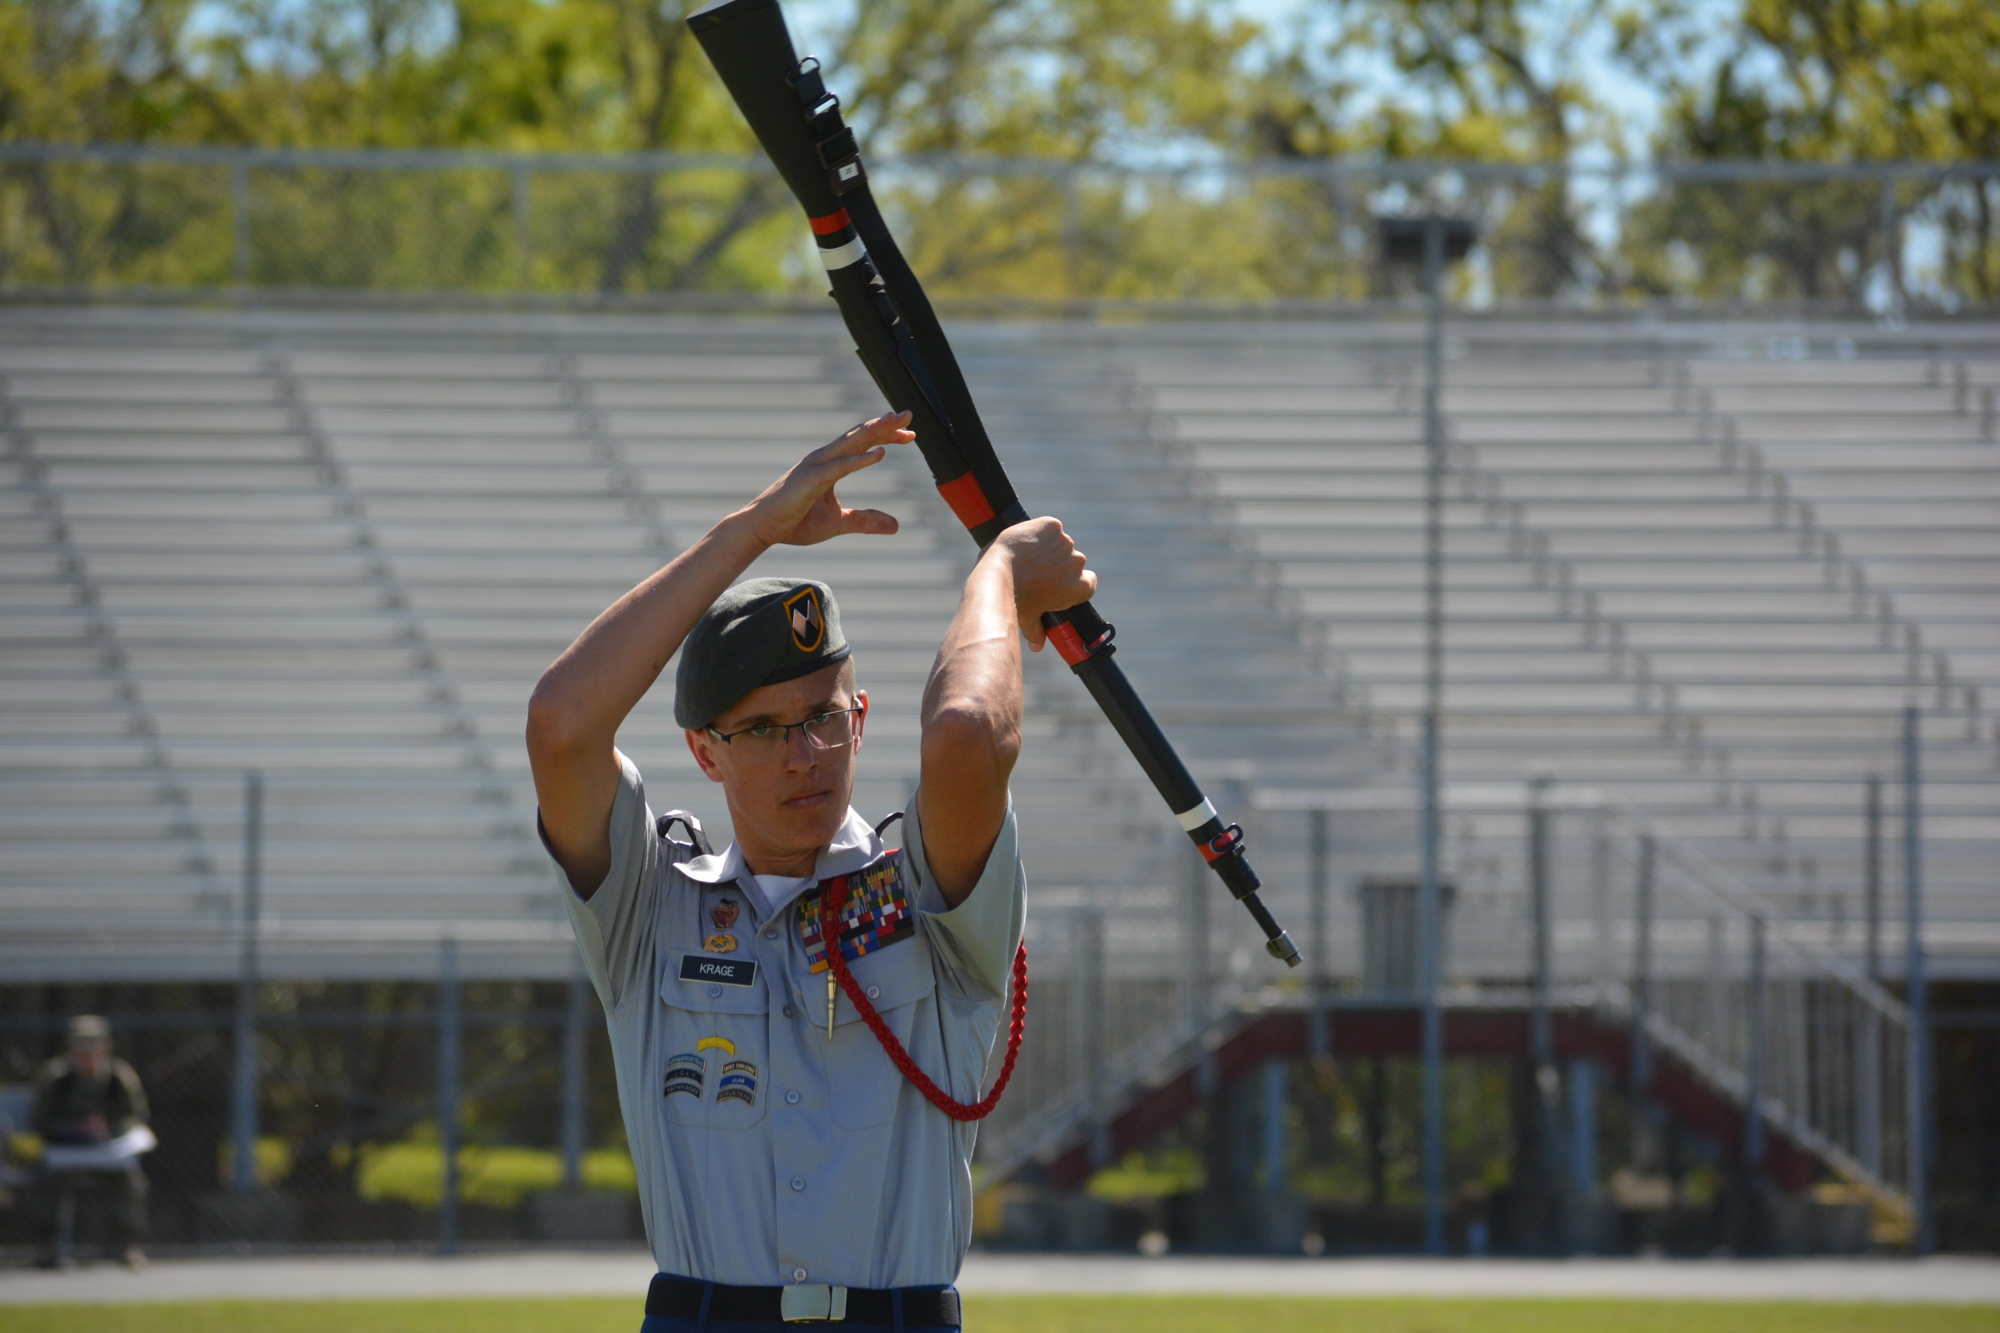 Braden River senior Kyle Krage leads his JROTC drill team to the state championships on Saturday.